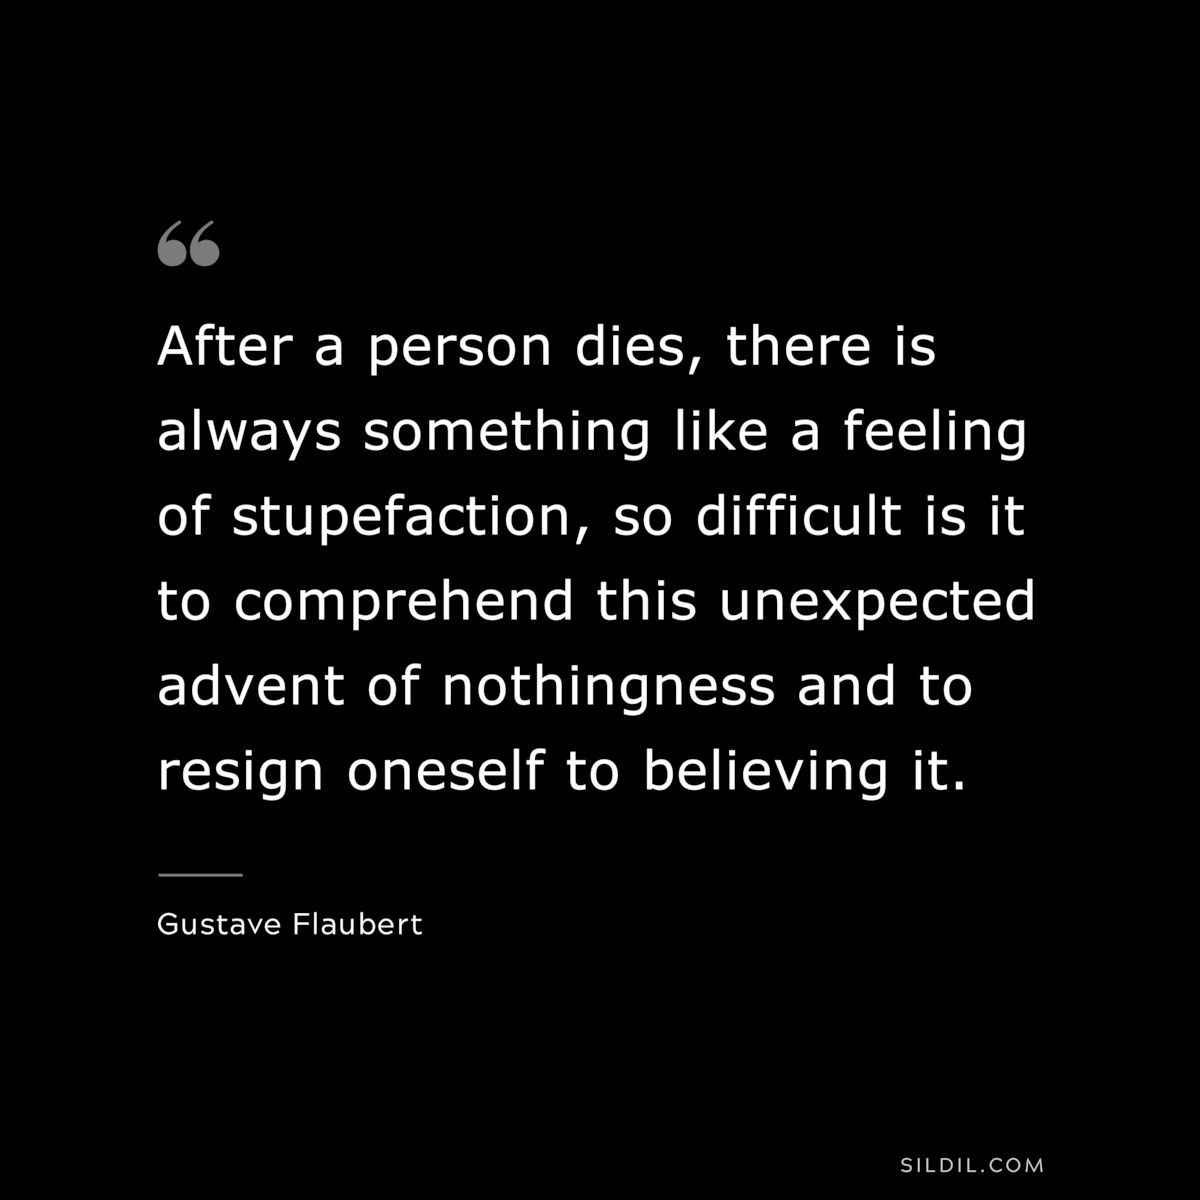 After a person dies, there is always something like a feeling of stupefaction, so difficult is it to comprehend this unexpected advent of nothingness and to resign oneself to believing it. ― Gustave Flaubert